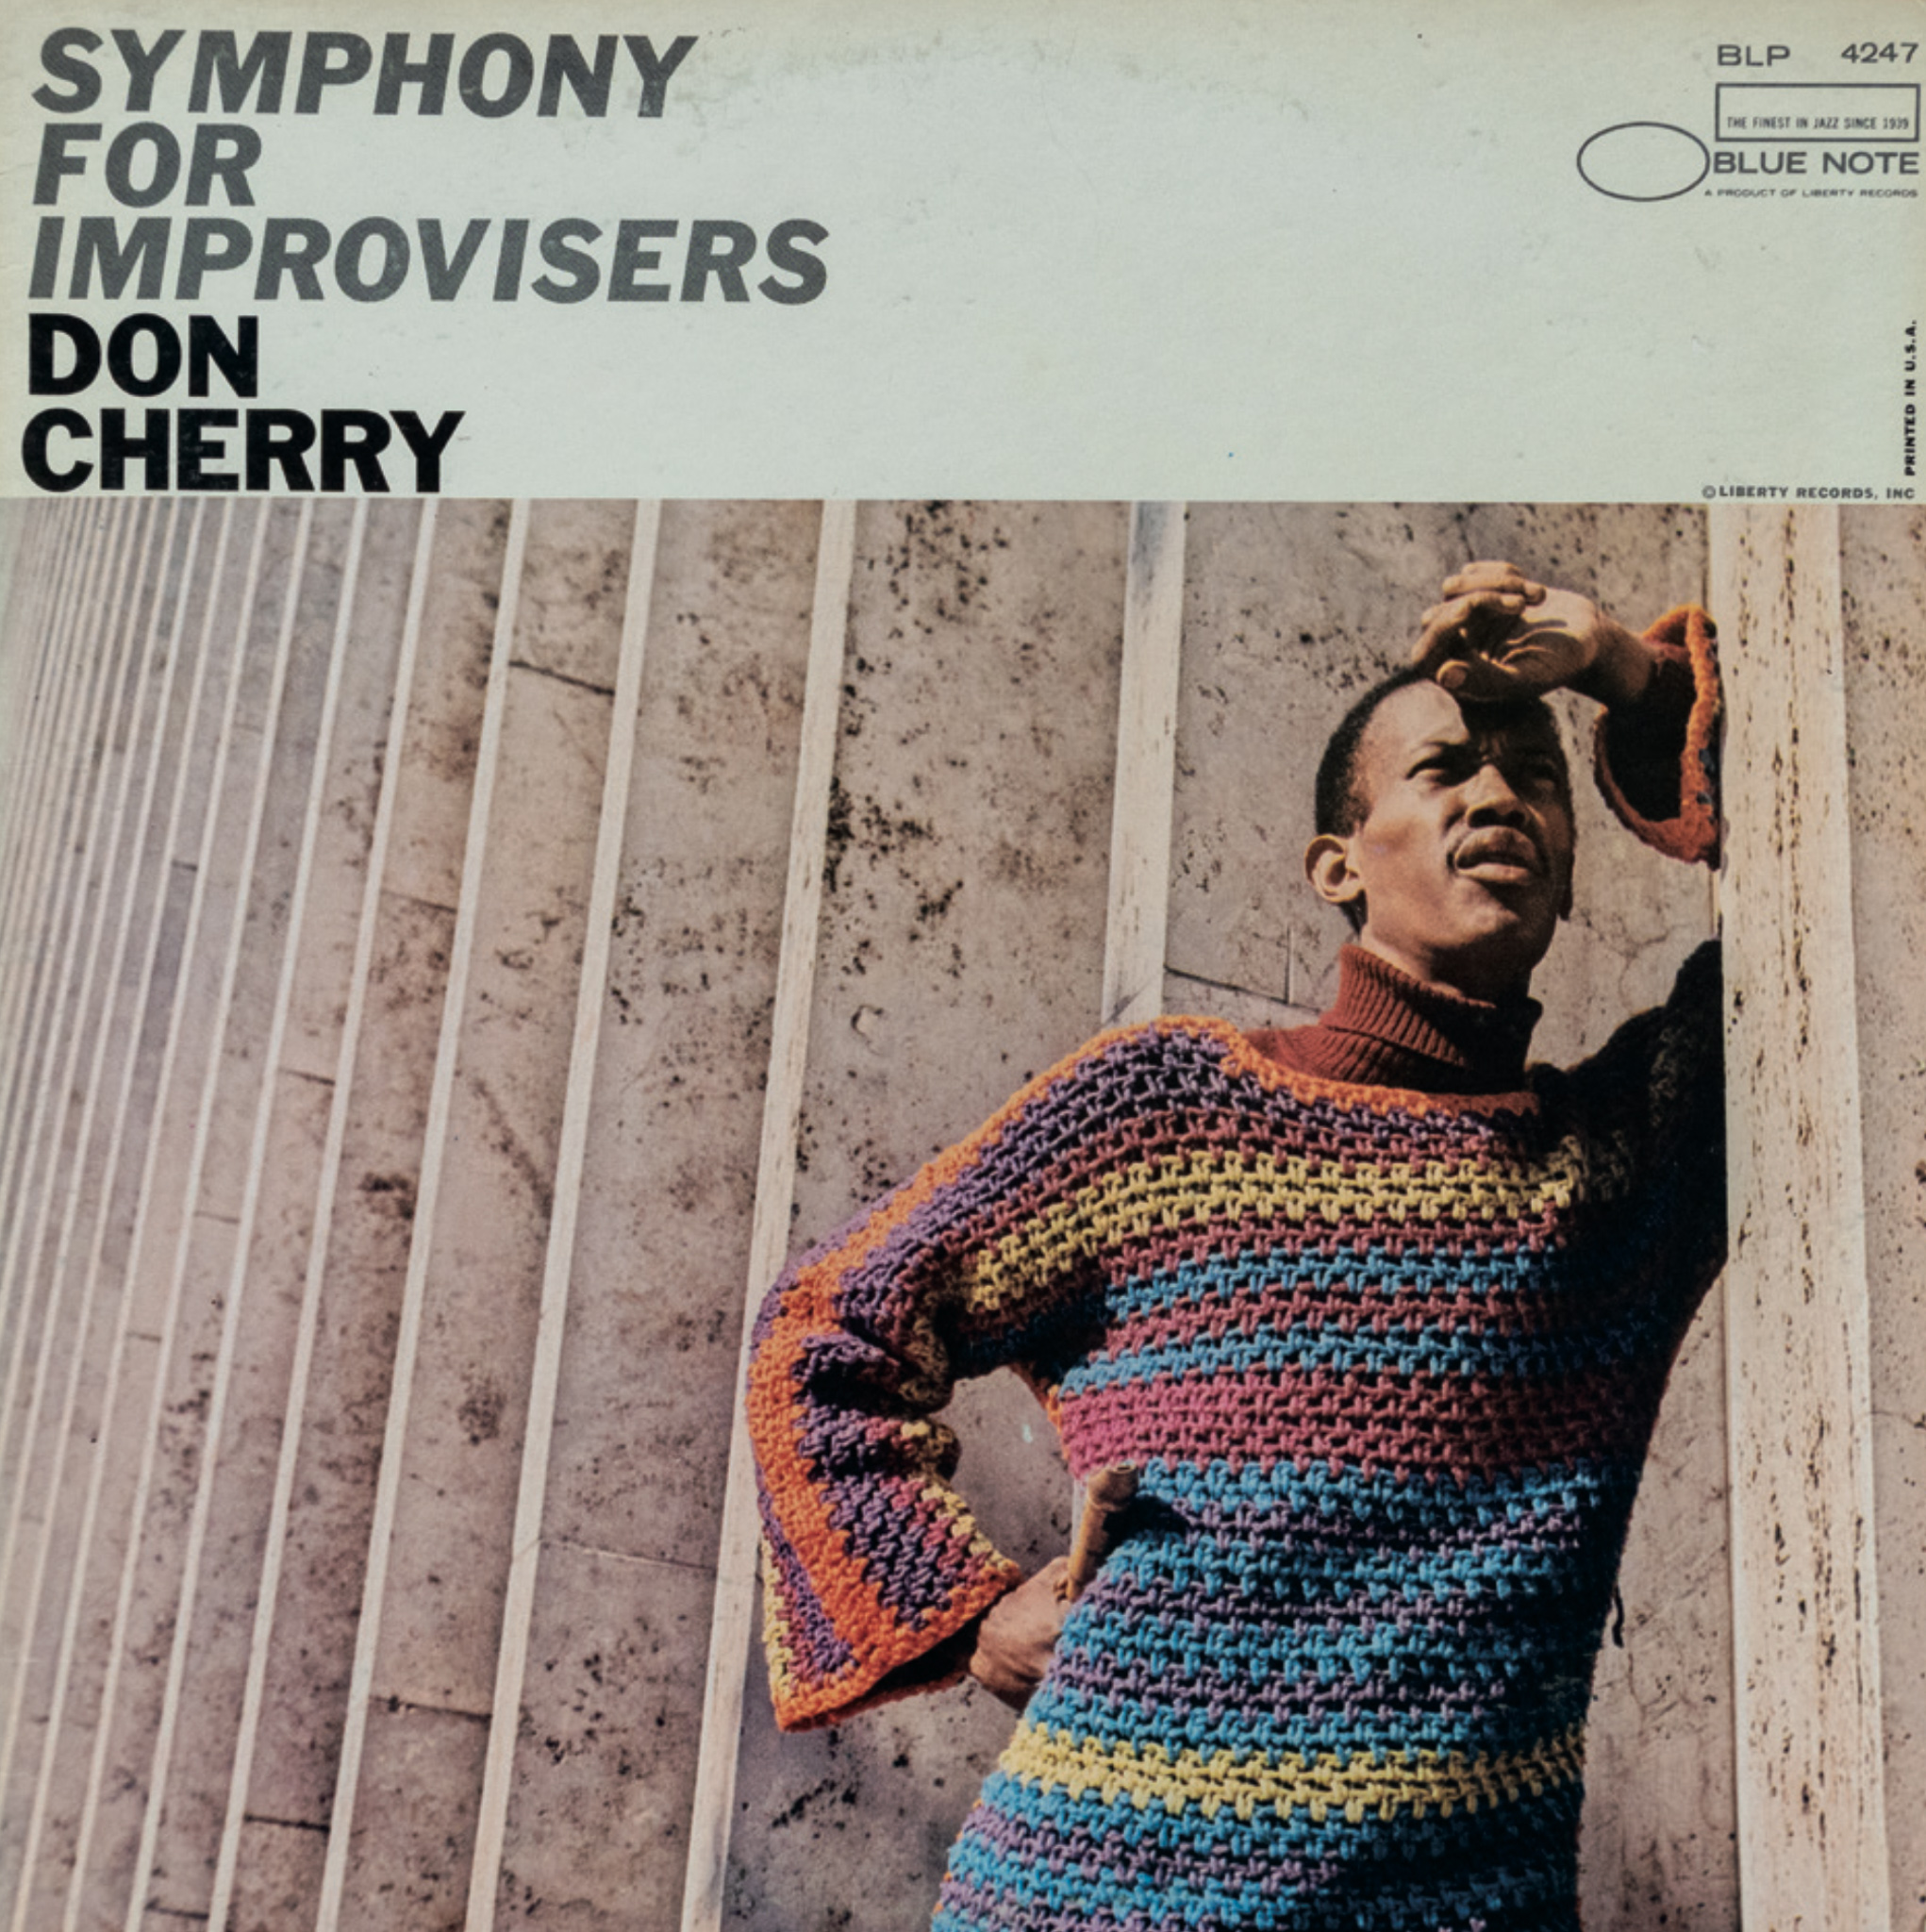 Album cover for Don Cherry’s Symphony for Improvisers (Blue Note, 1967).